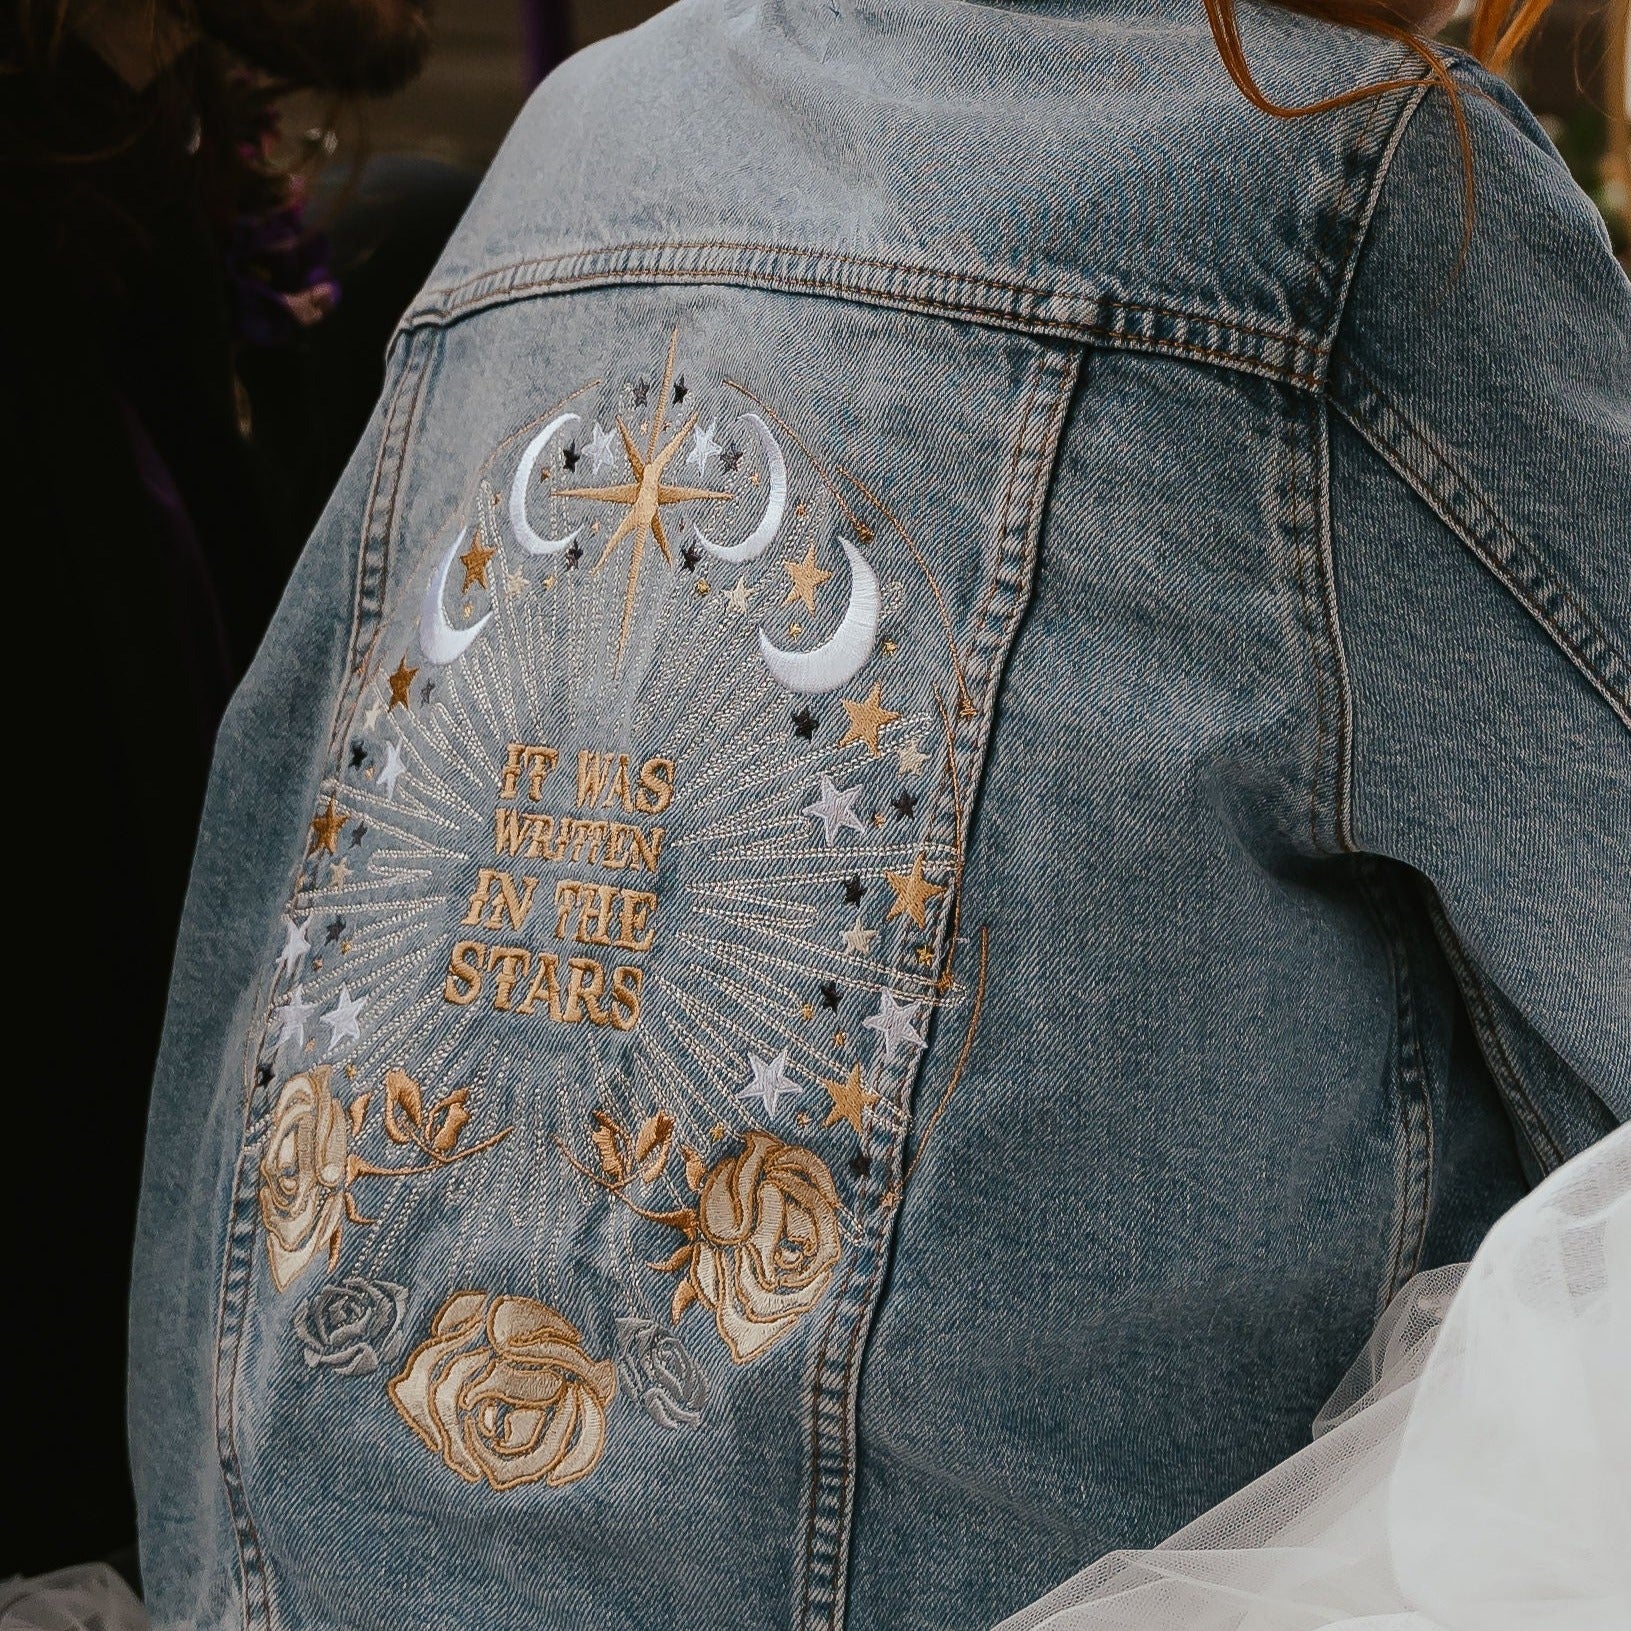 Chic Starry Night Denim Jacket: Make a celestial statement on your wedding day with this stylish cover-up, showcasing a starry night design in ecru embroidery on classic denim